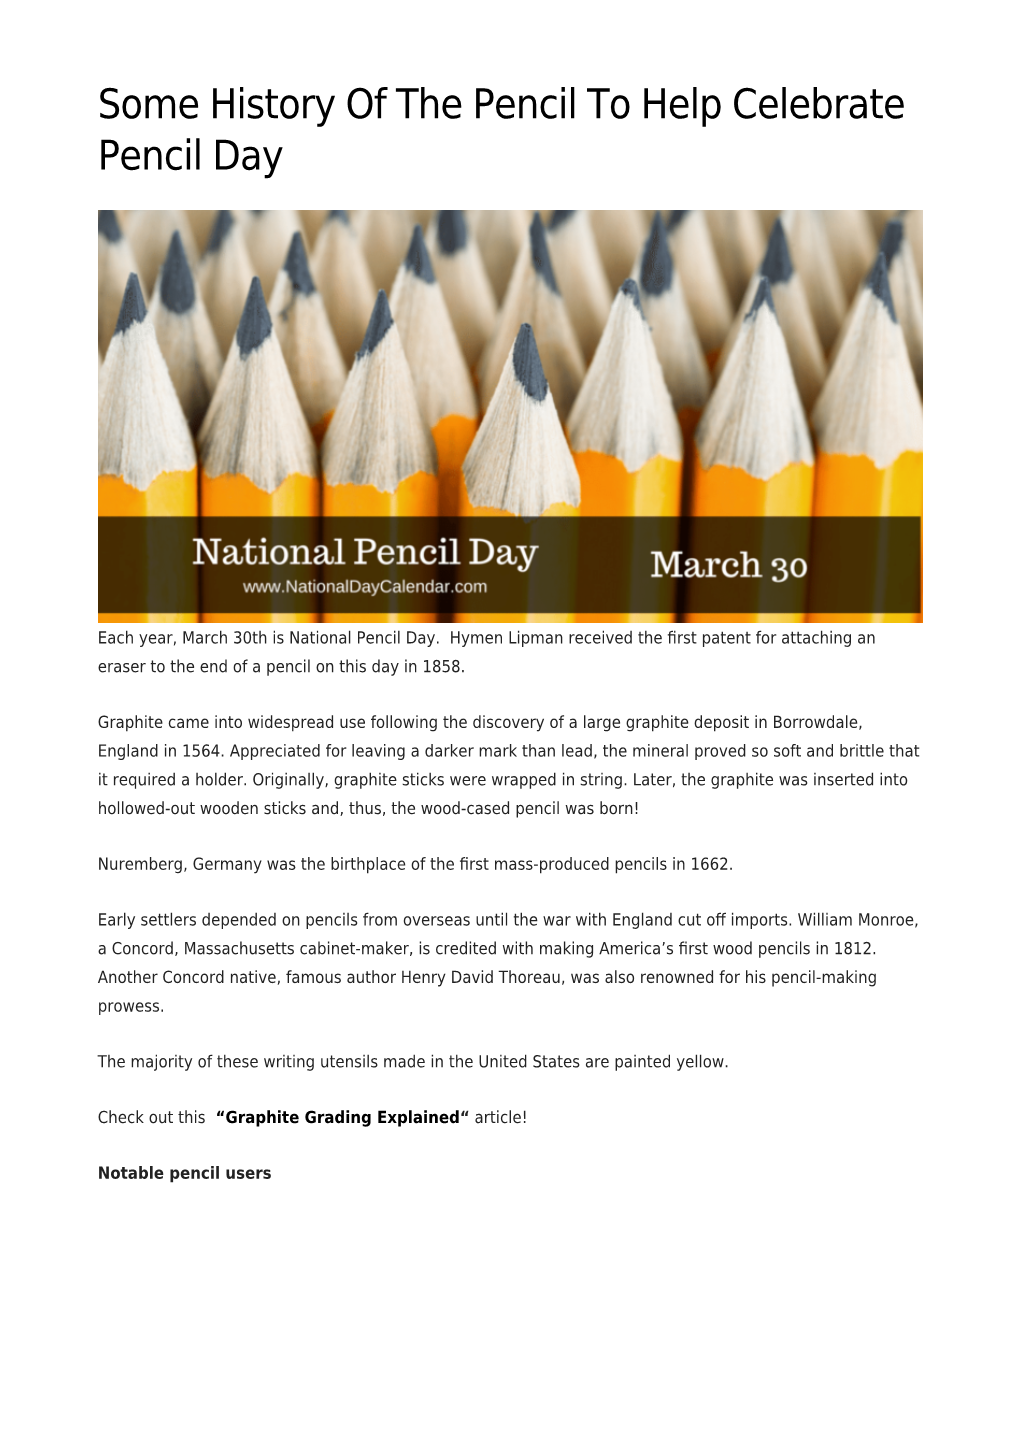 Some History of the Pencil to Help Celebrate Pencil Day